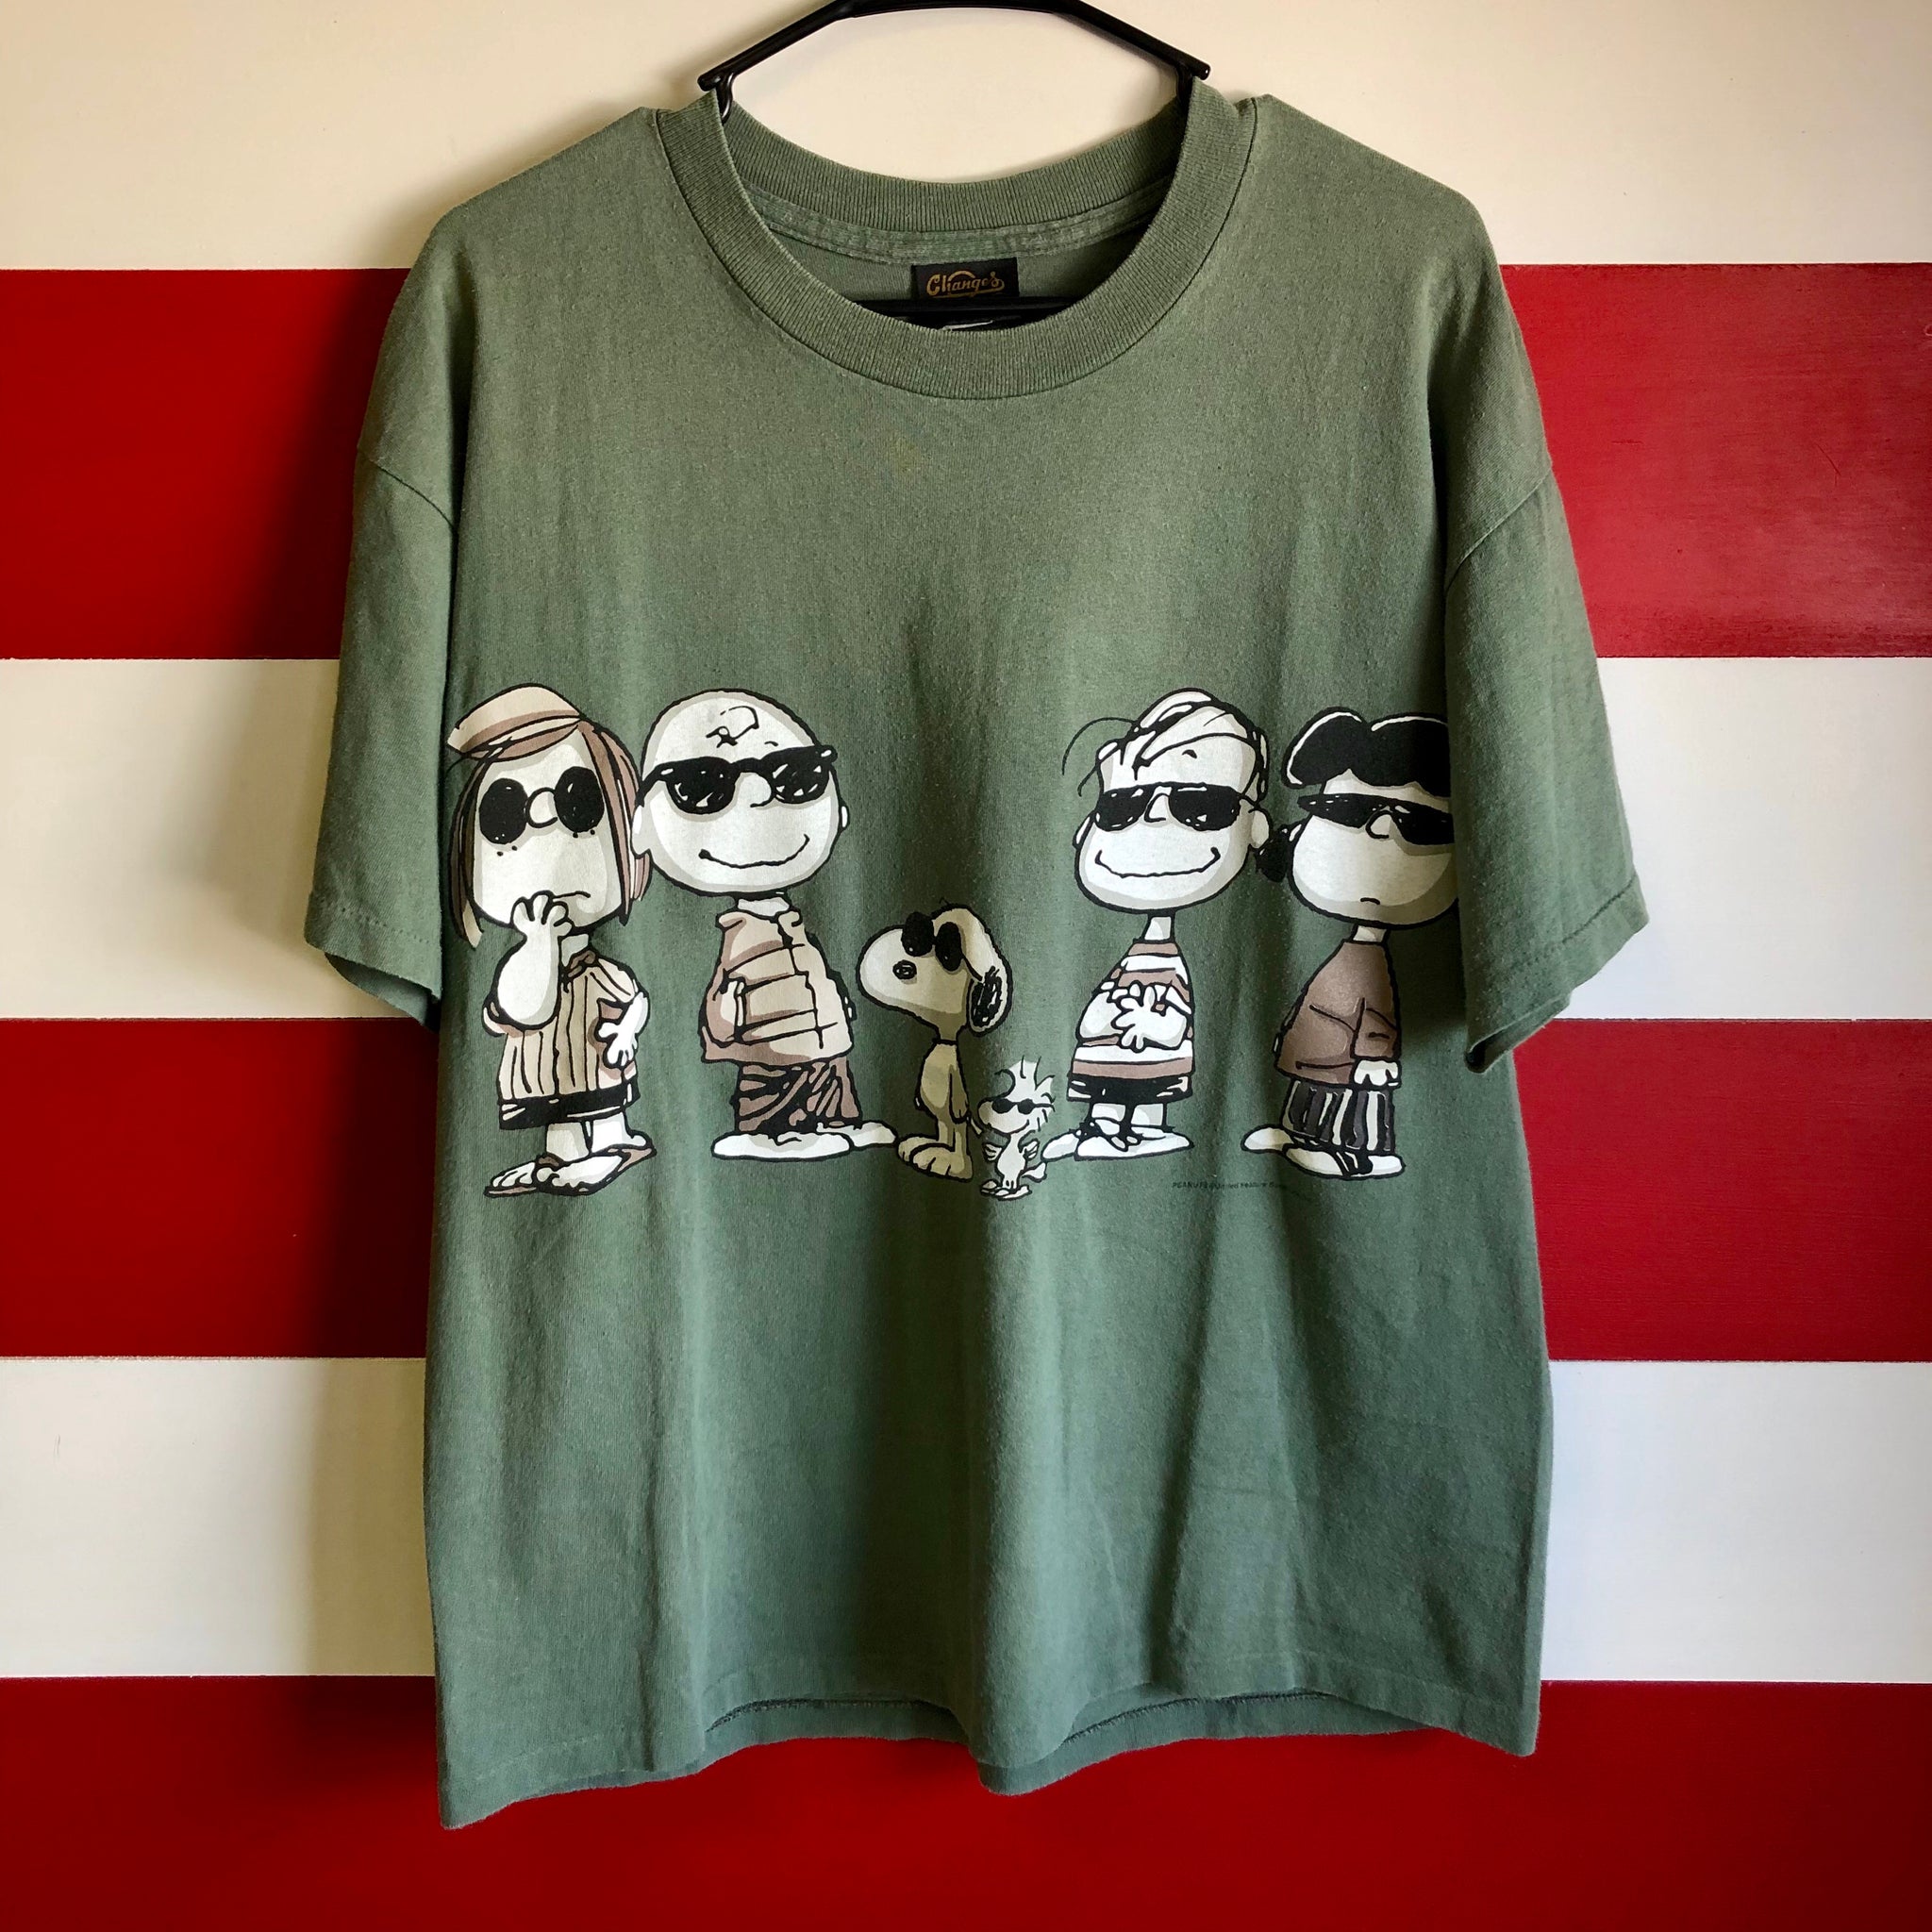 Image result for peanuts characters on long sleeved shirt